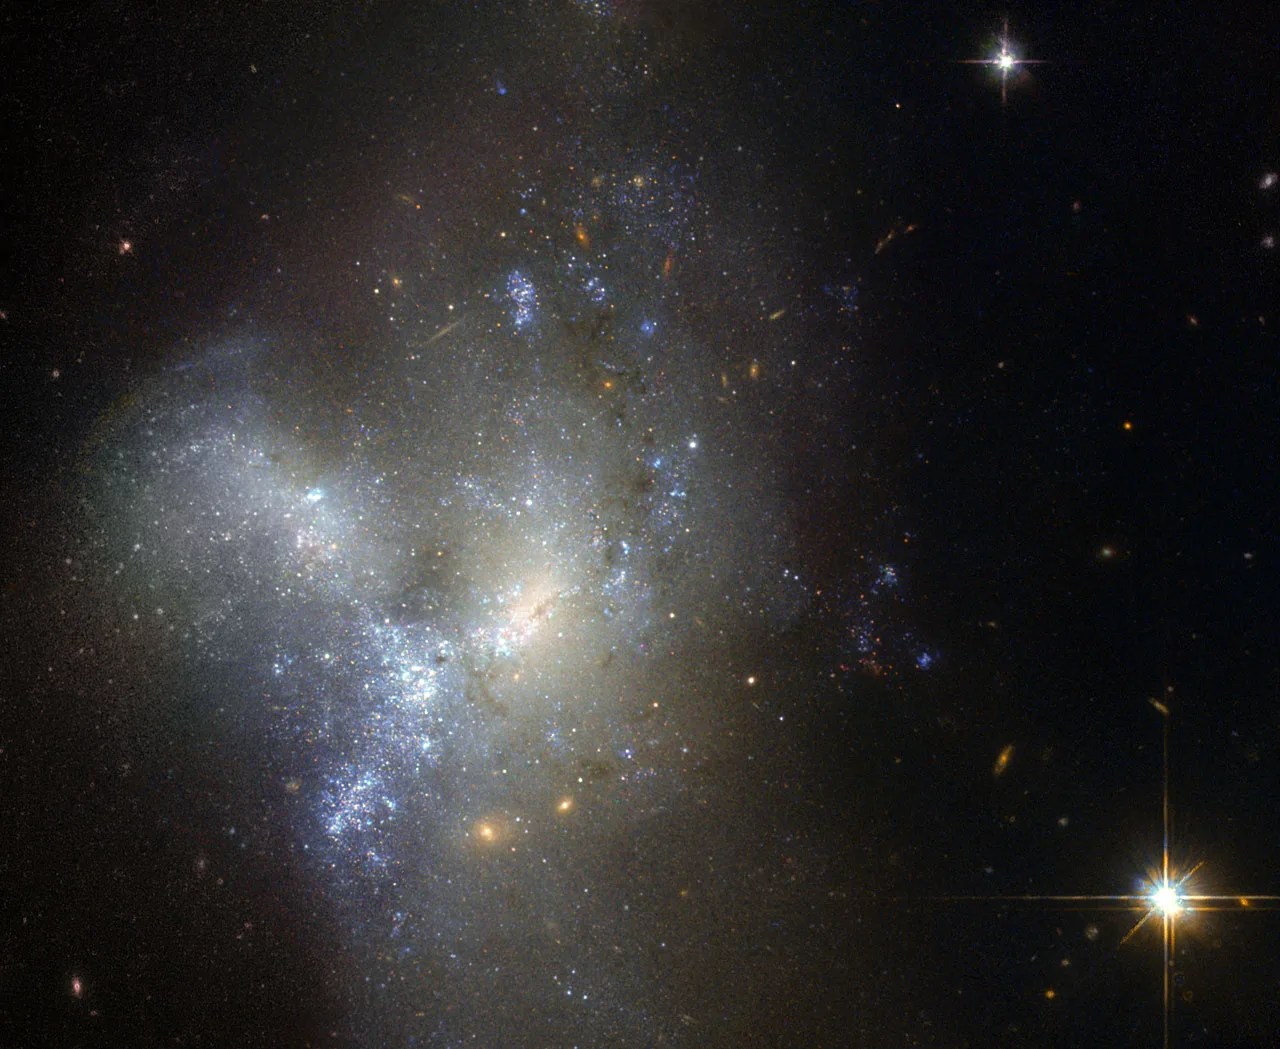 Two or more galaxies in the act of merging together